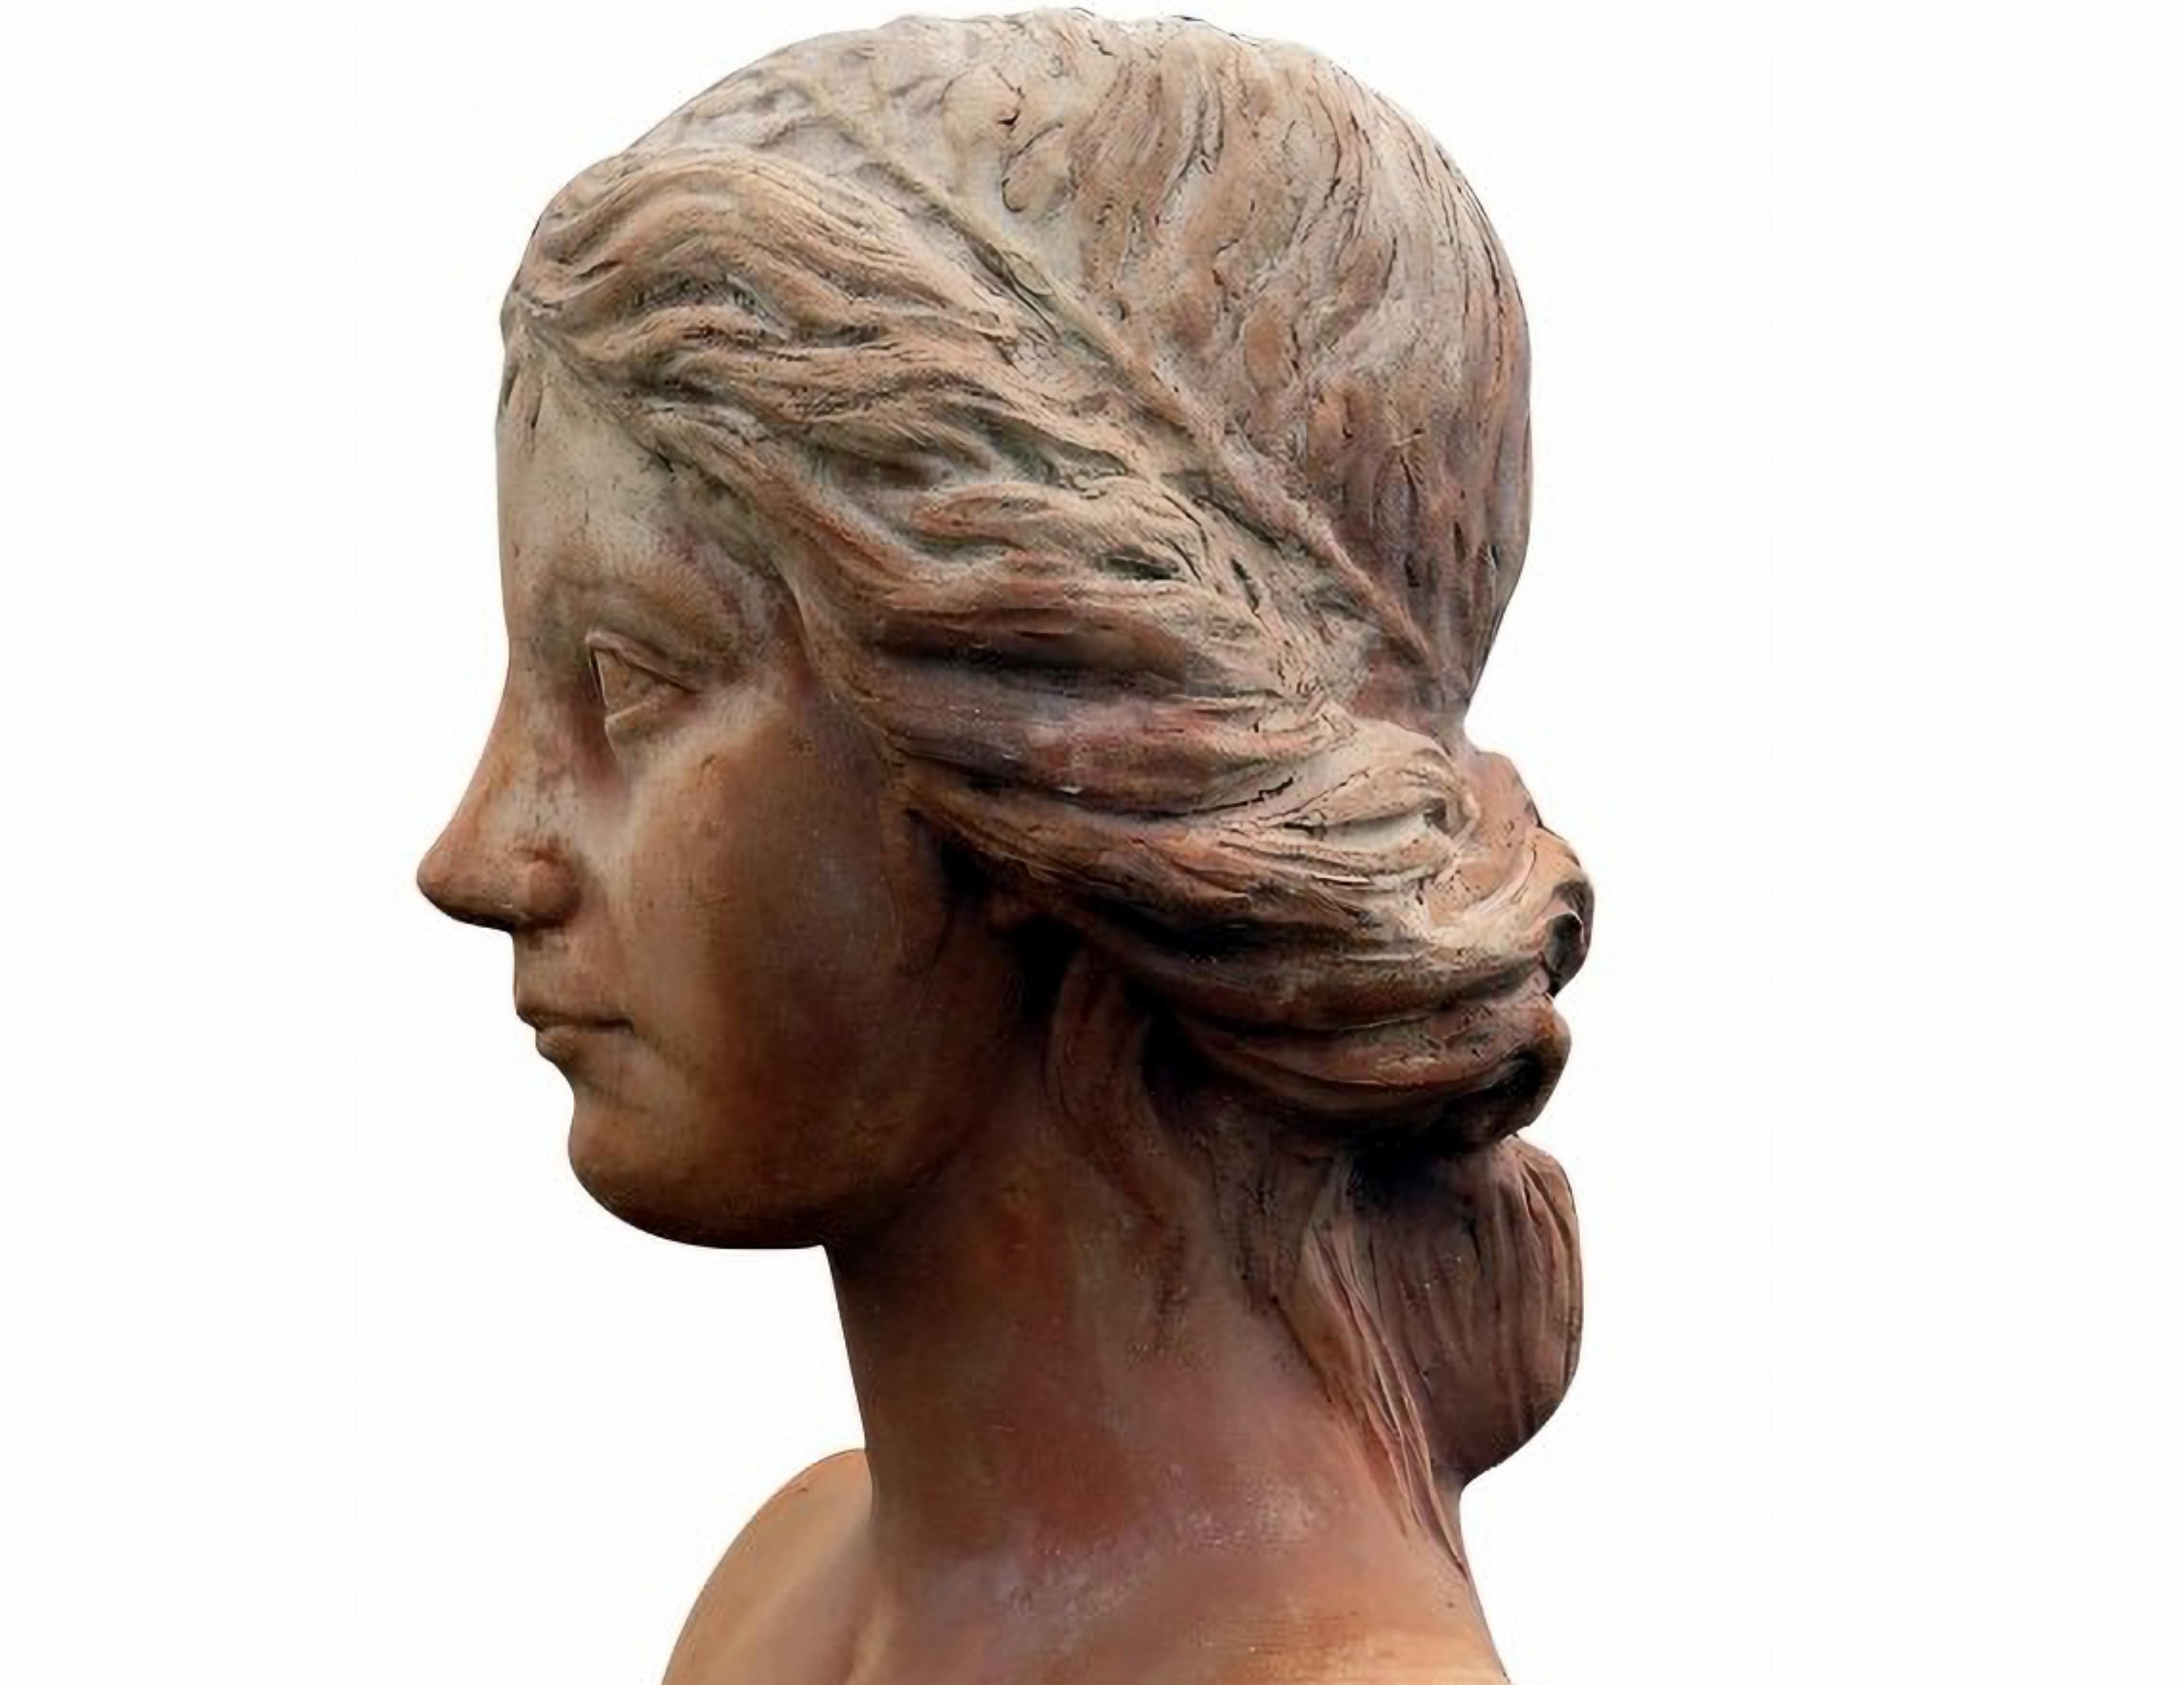 BUST OF A YOUNG FLORENTINE RENAISSANCE WOMAN 20th Century

HEIGHT 43 cm
WIDTH 40 cm
DEPTH 17 cm
WEIGHT 15 Kg
MANUFACTURING Made in Italy - Tuscany / Tuscany
MATERIAL Terracotta